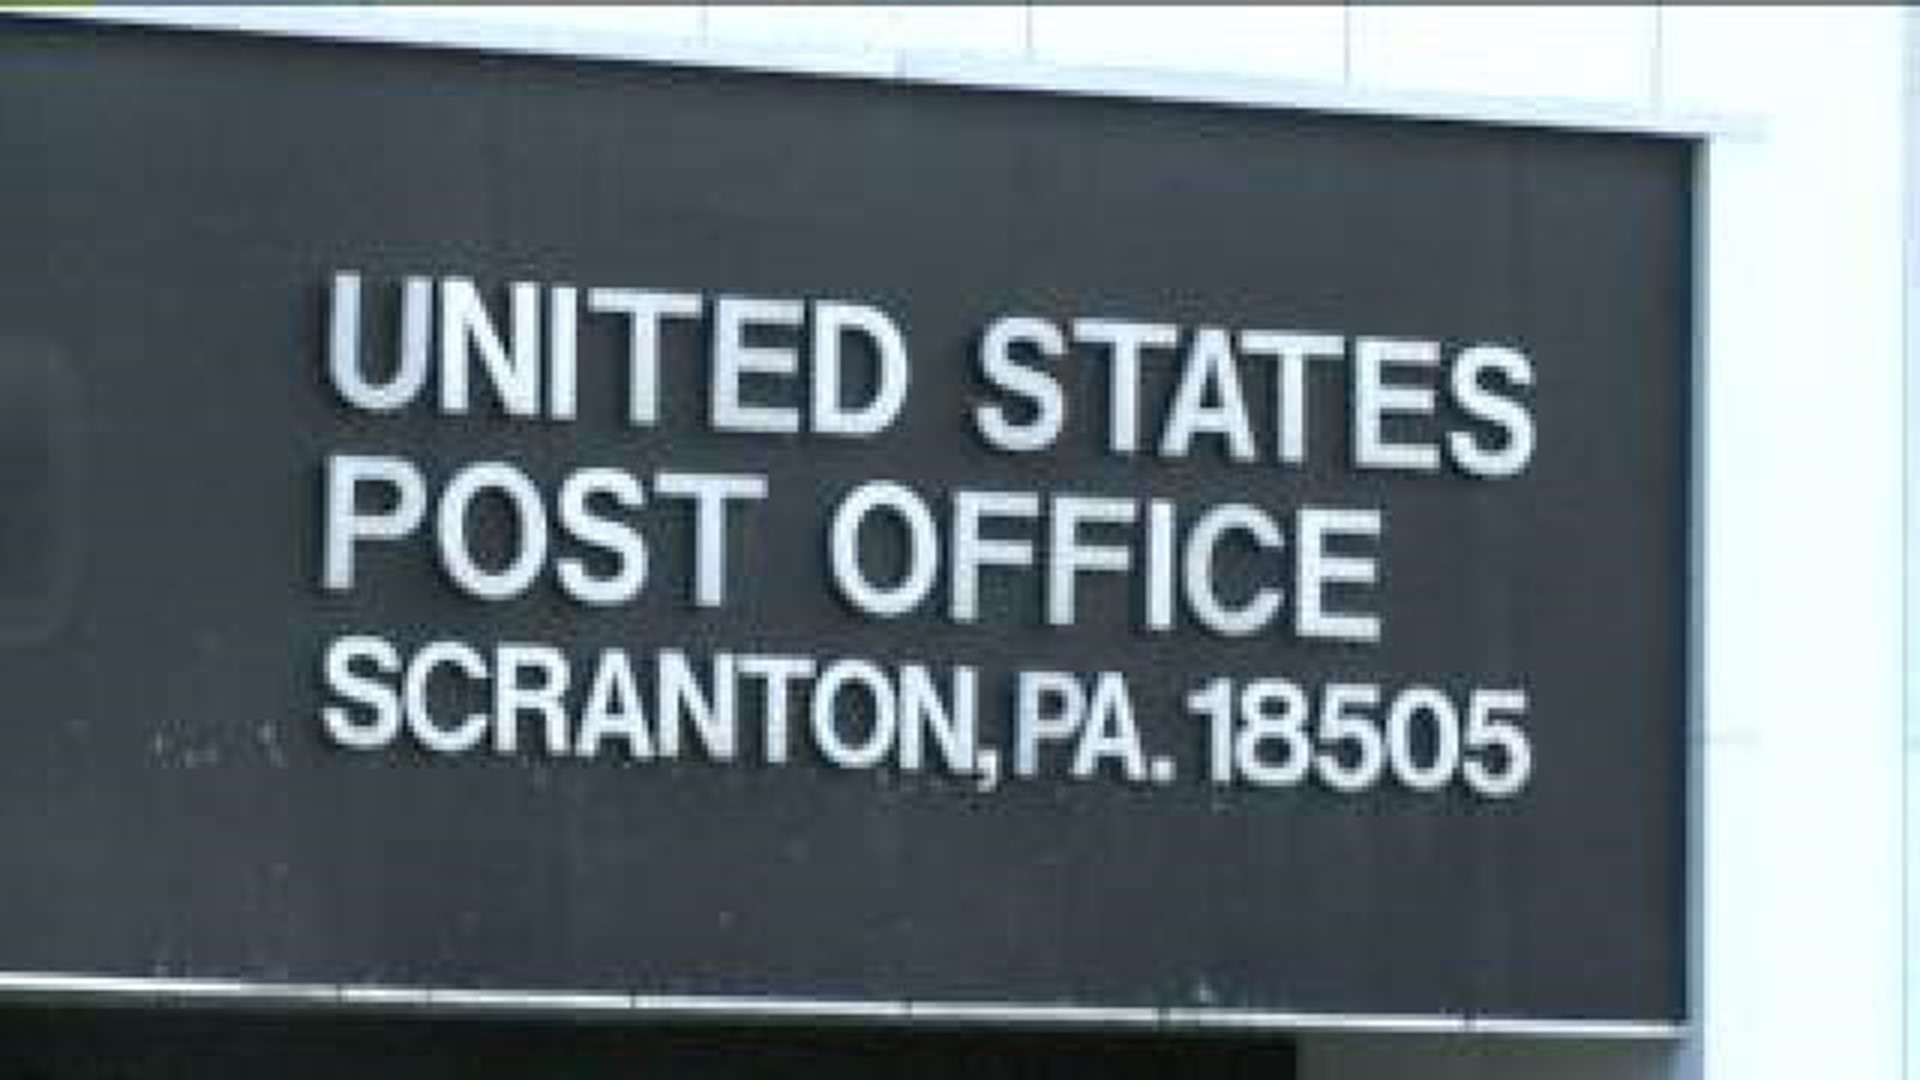 Postal Service Jobs To Stay, For Now